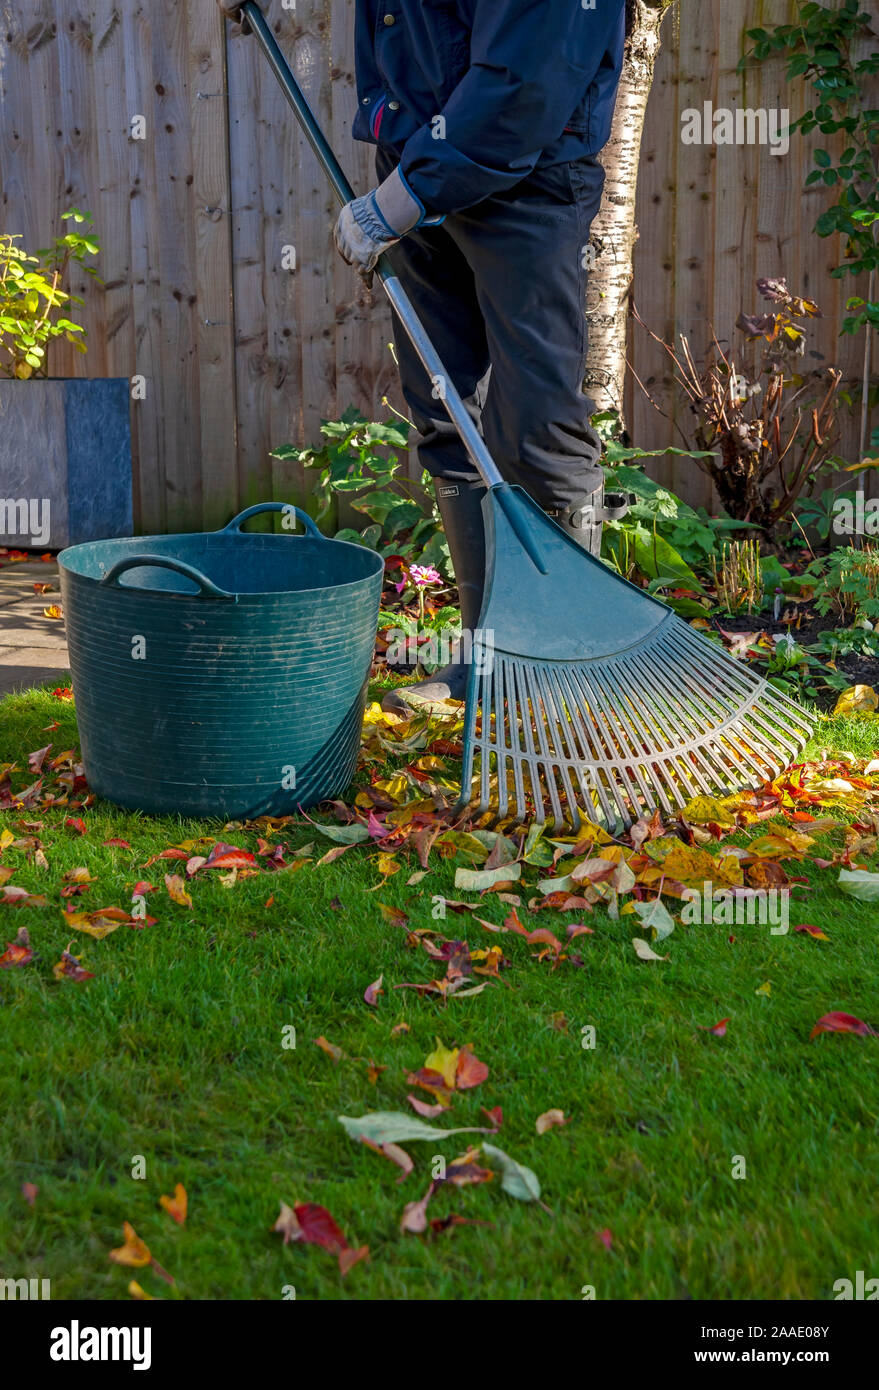 Close up of man gardener person raking and collecting fallen leaves from a lawn in the garden in autumn England UK United Kingdom GB Great Britain Stock Photo